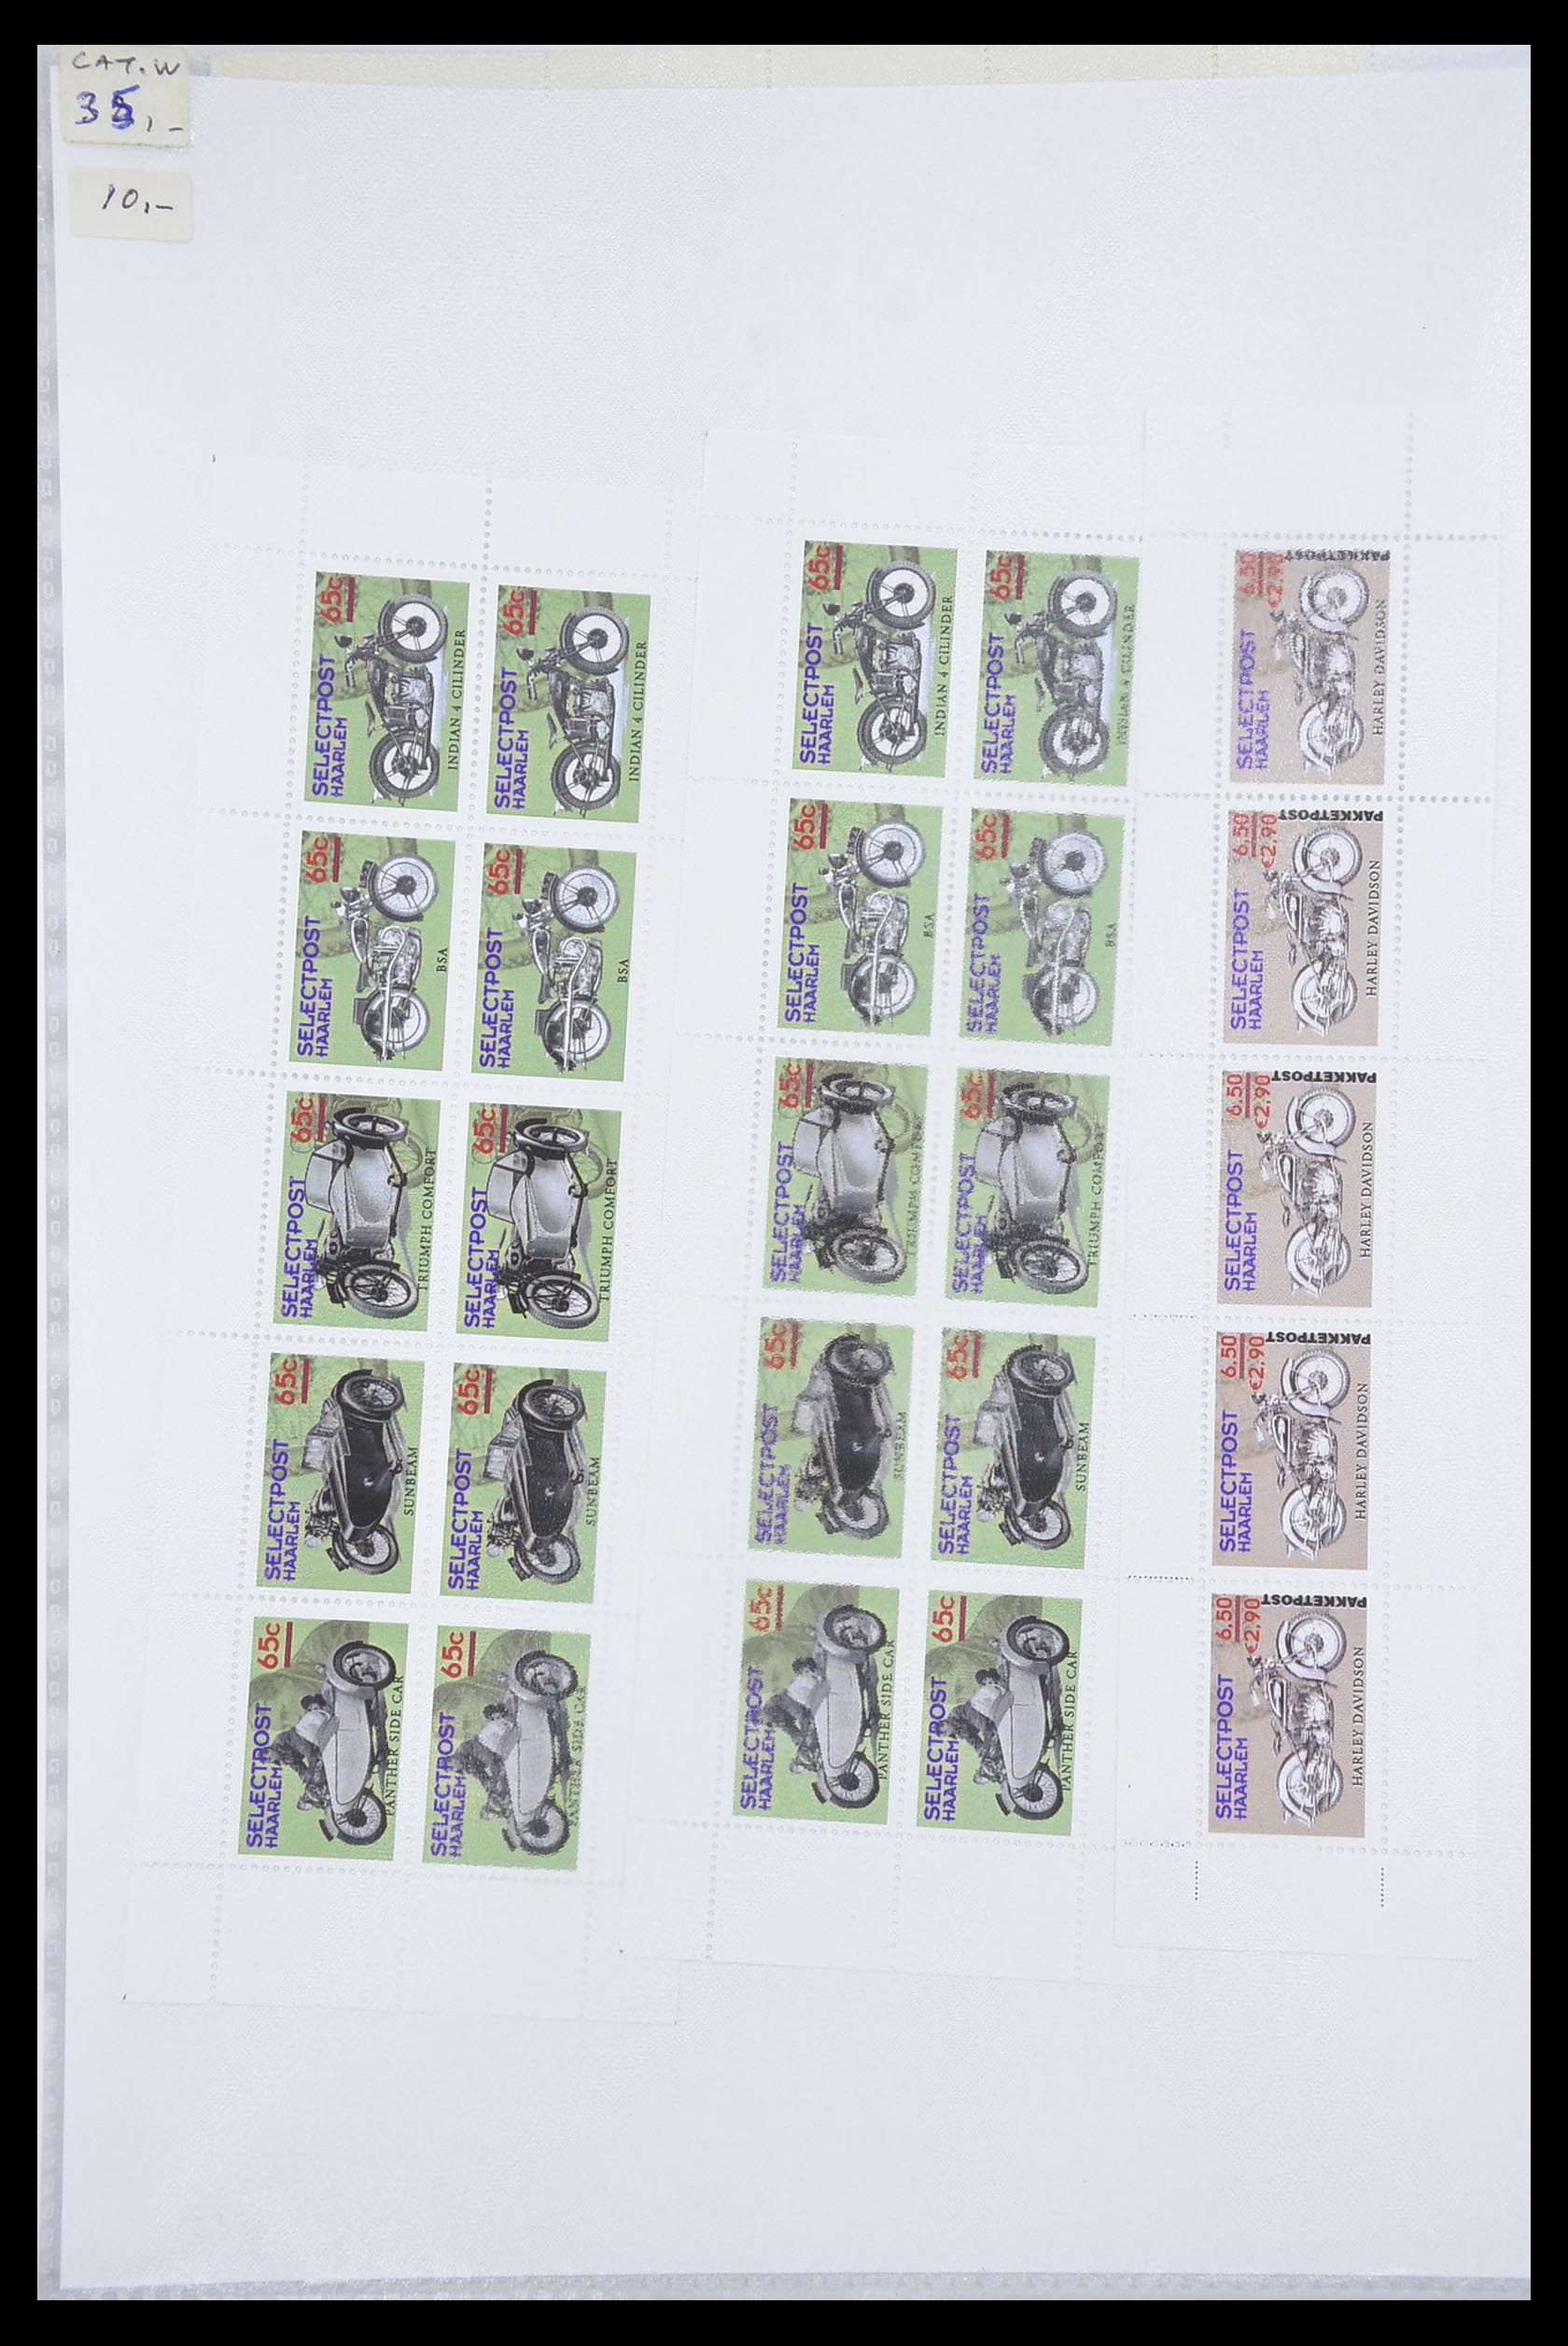 33543 716 - Stamp collection 33543 Netherlands local post 1969-2017.